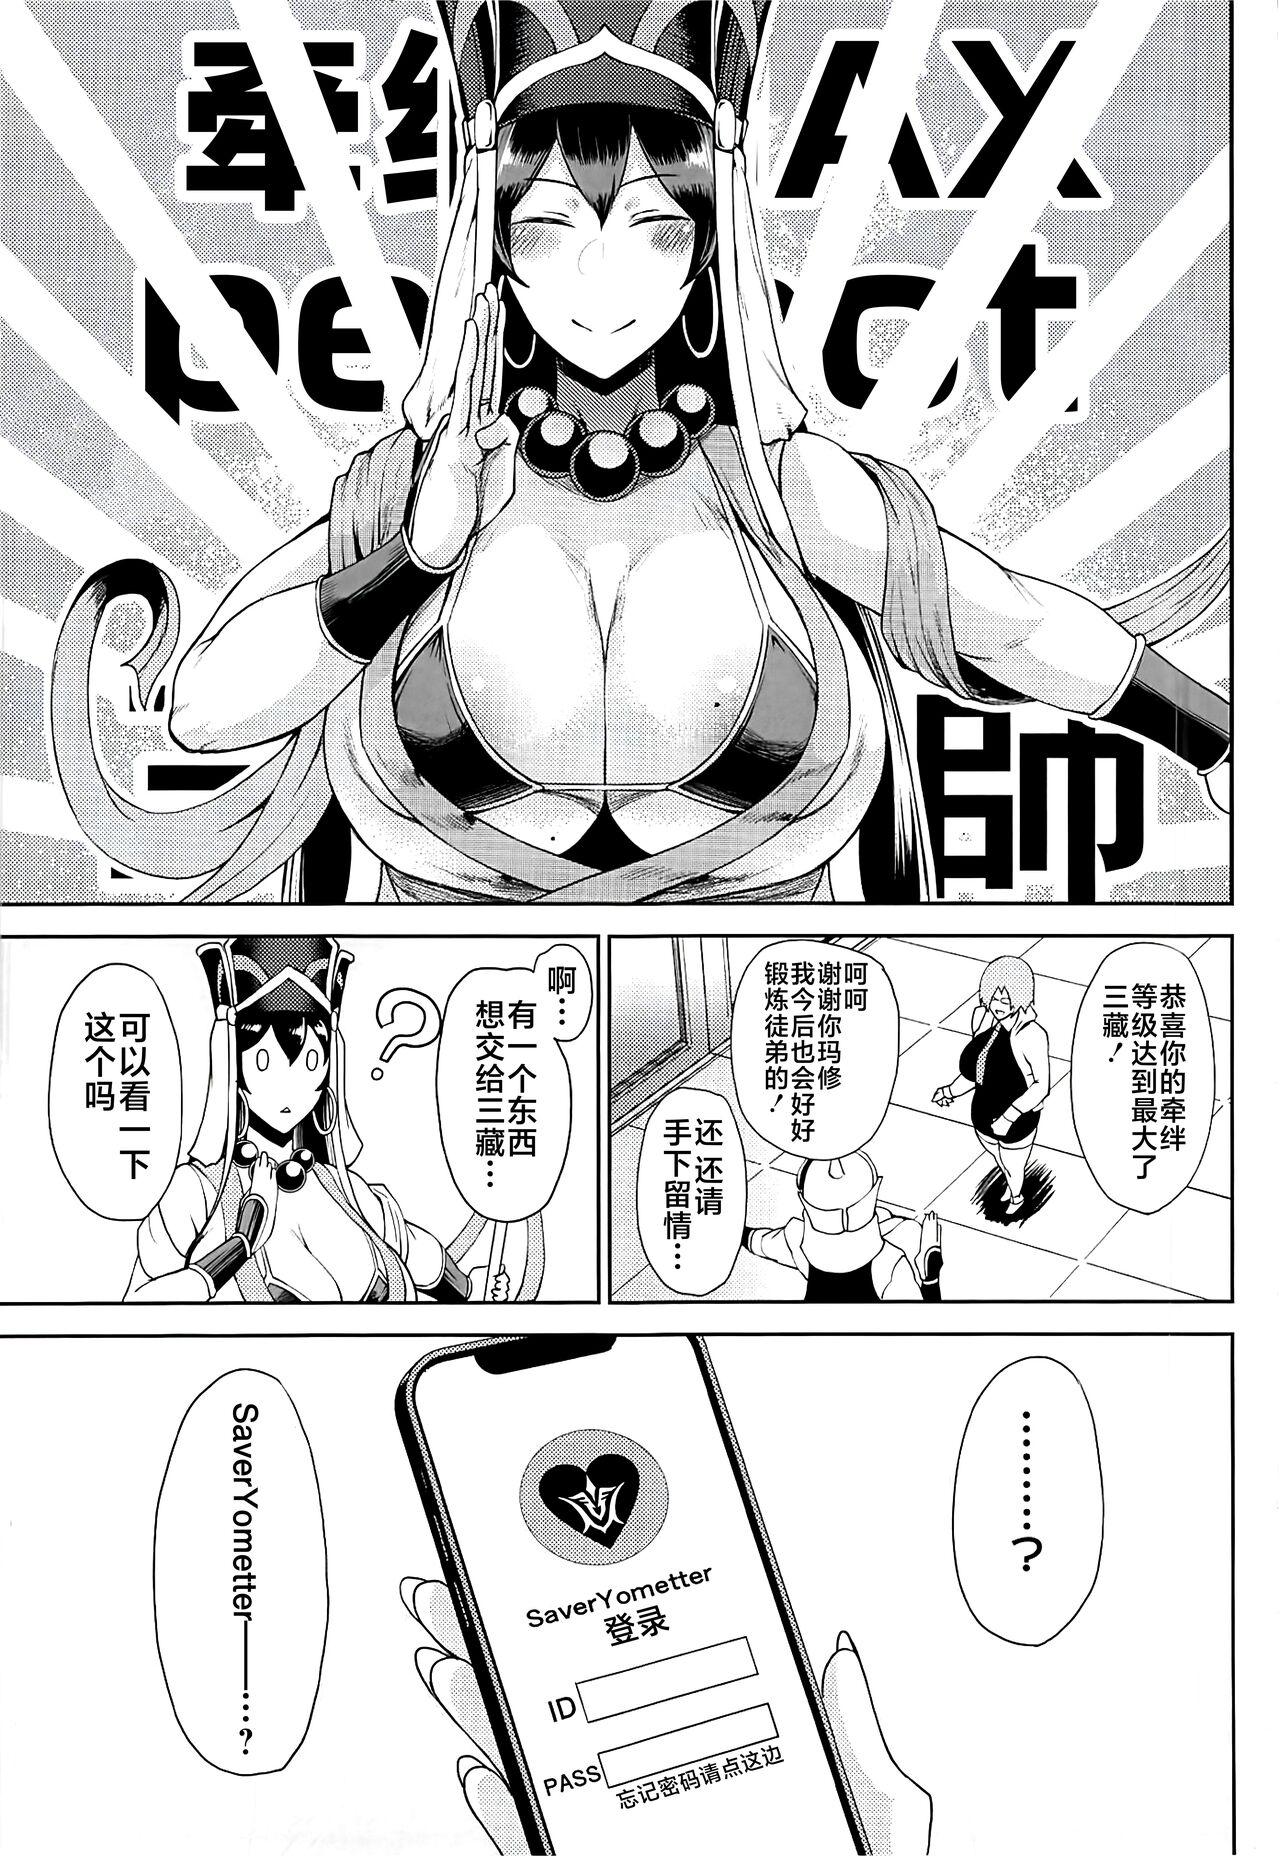 Classic Shugyou Now - Fate grand order Face Fucking - Page 2